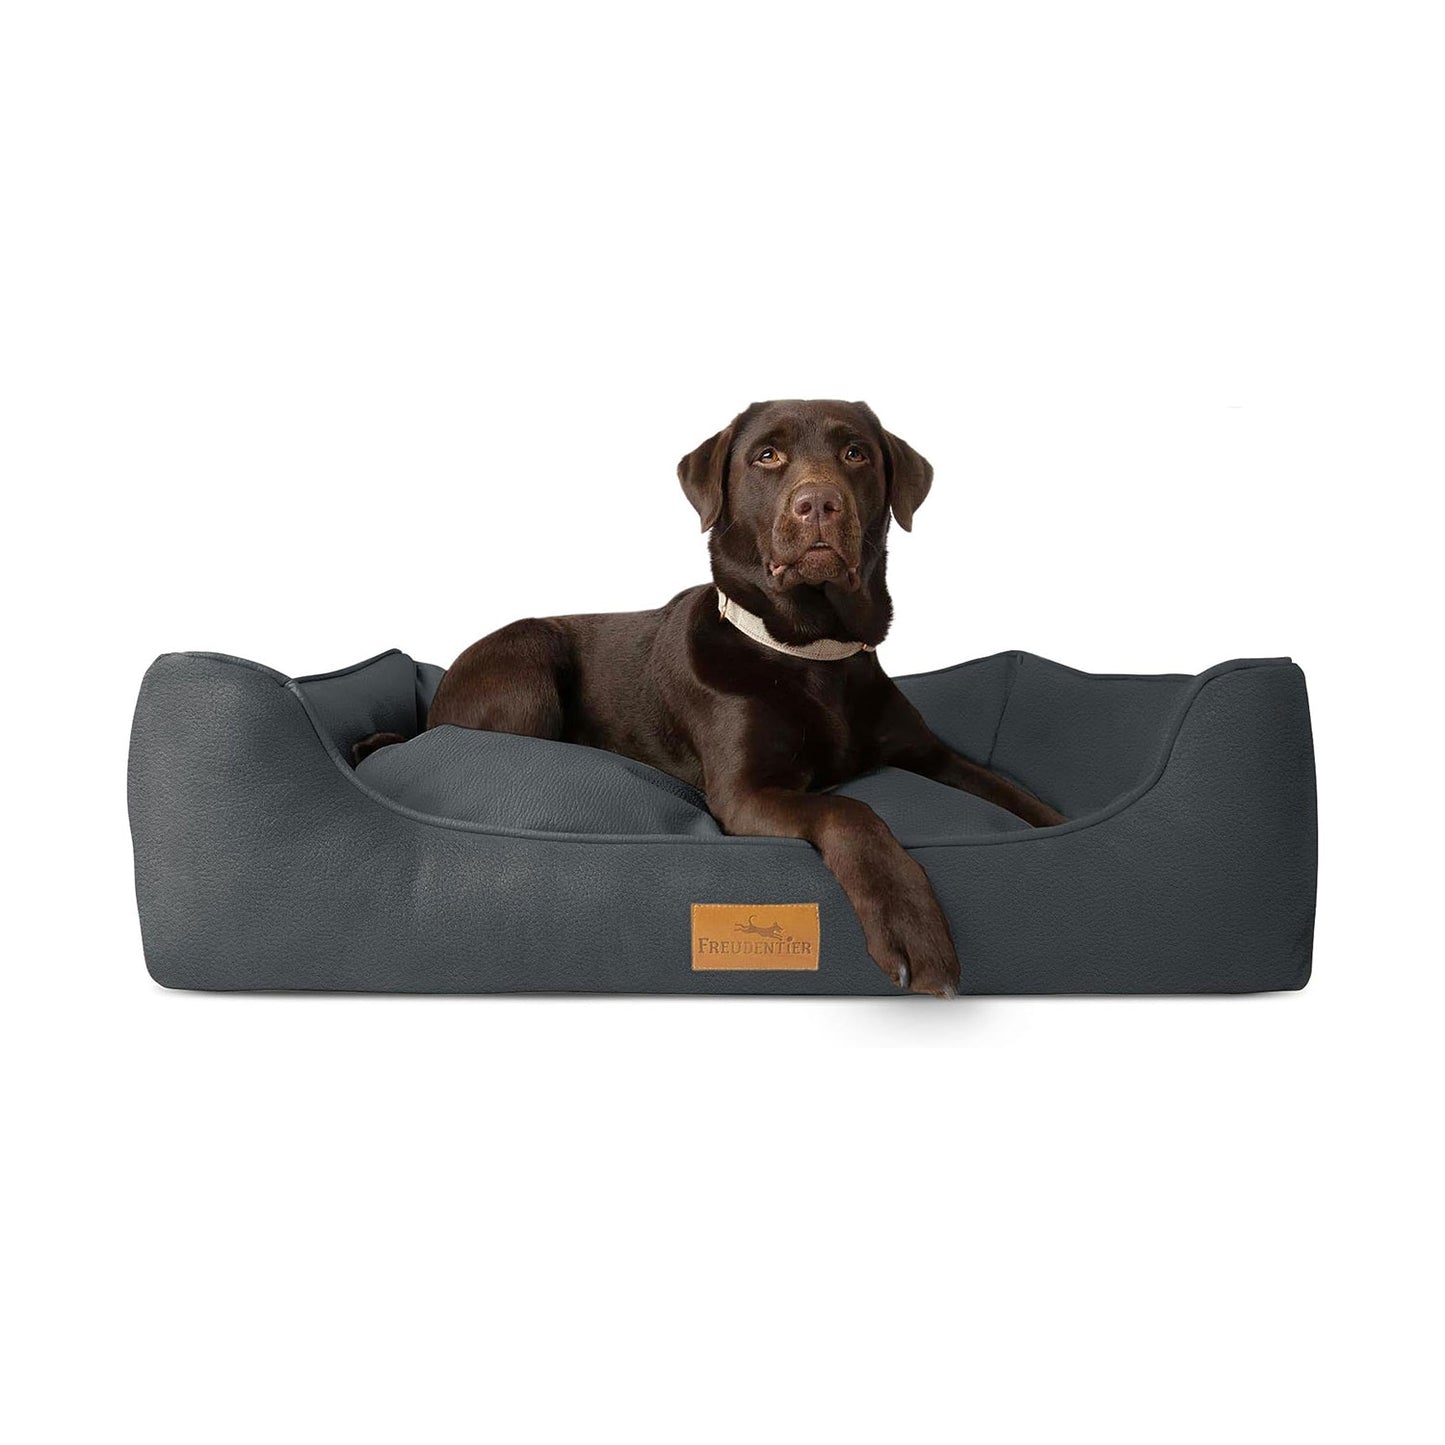 Dog bed from the Freudentier brand